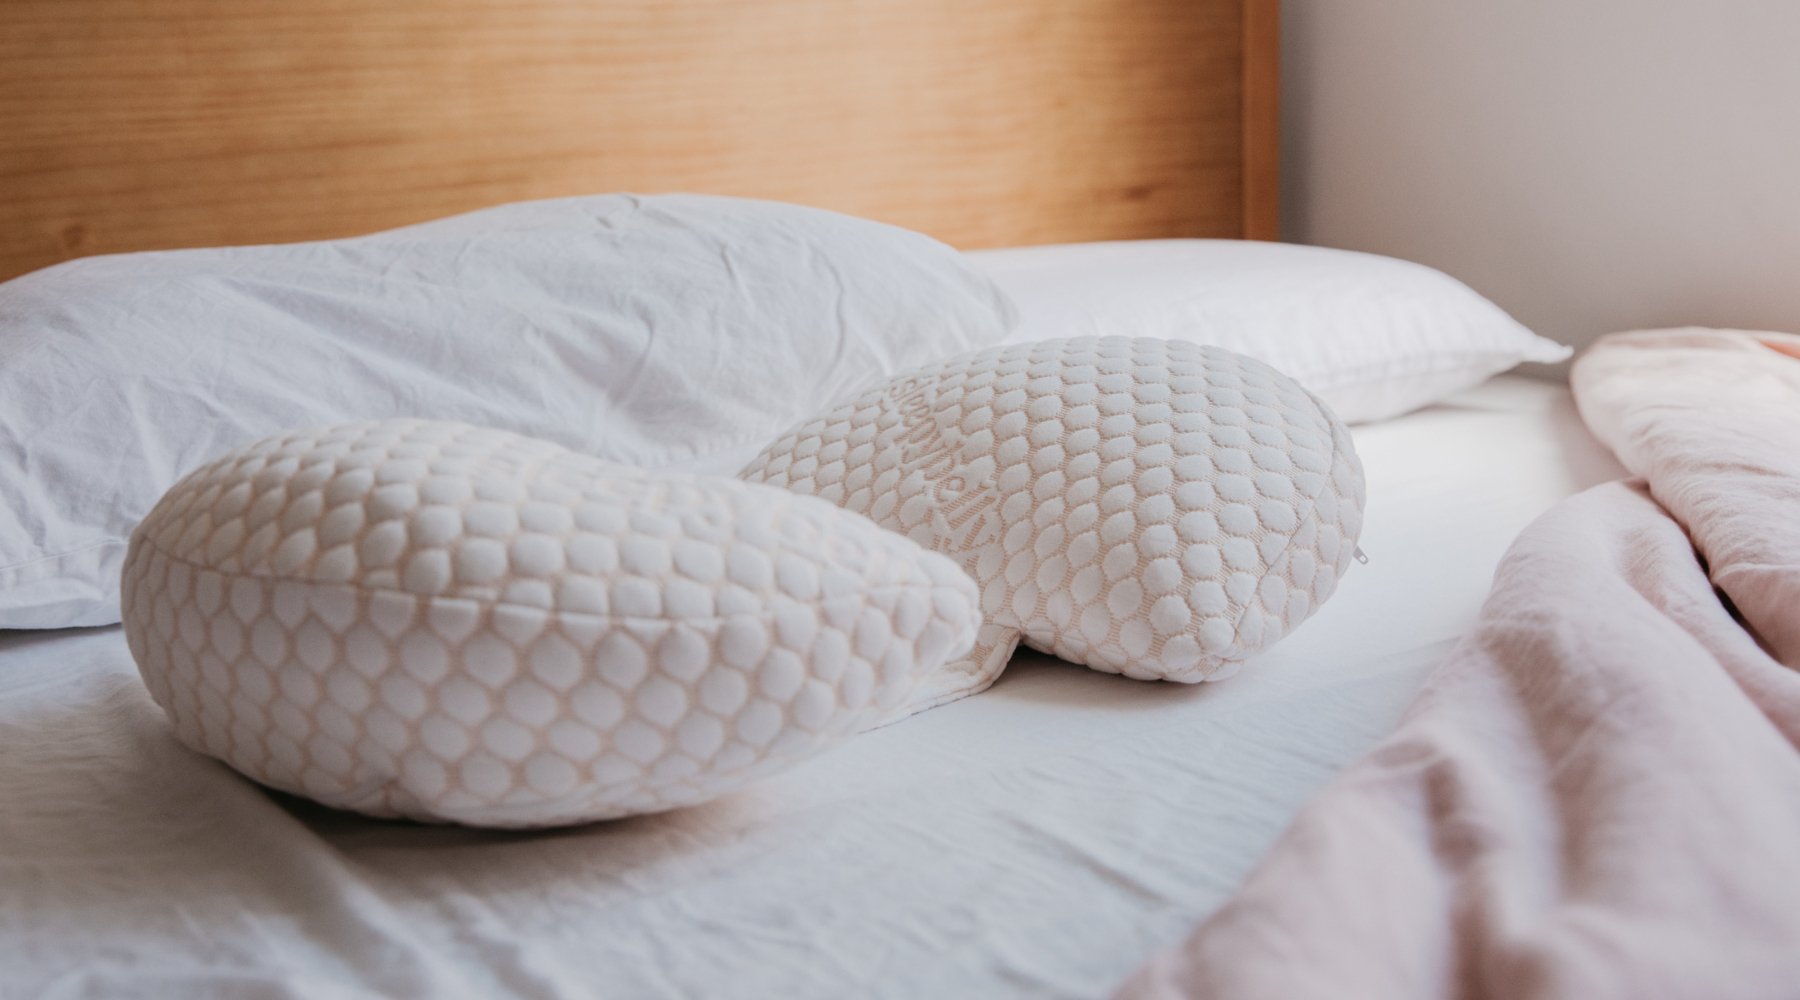 Which Pillow Shape is Best During Pregnancy? - Sleepybelly